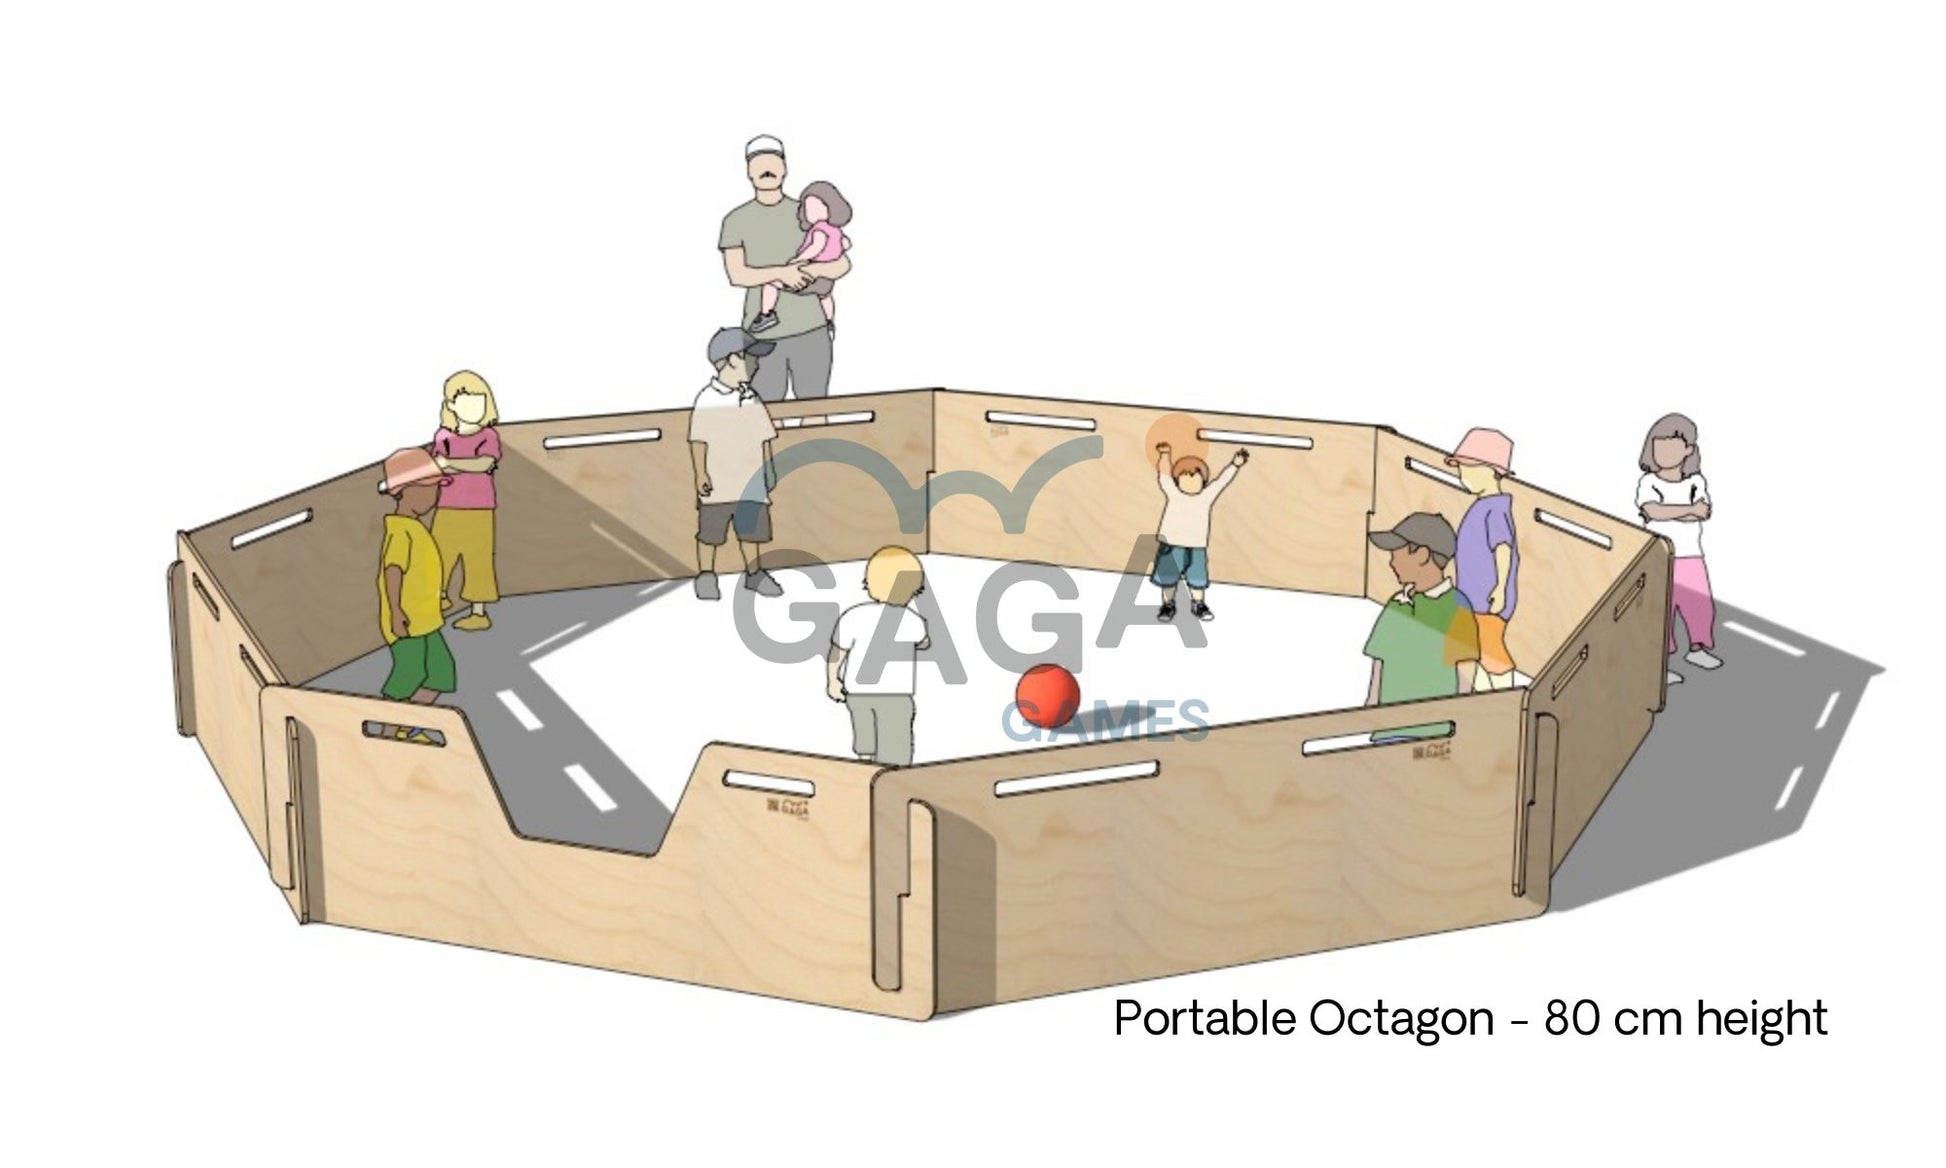 Get ready for endless hours of fun with our 80cm Octagonal Portable Gaga Pit, perfect for temporary indoor and outdoor setups of the game of Gaga Ball. Made in Australia and delivered Australia-wide.